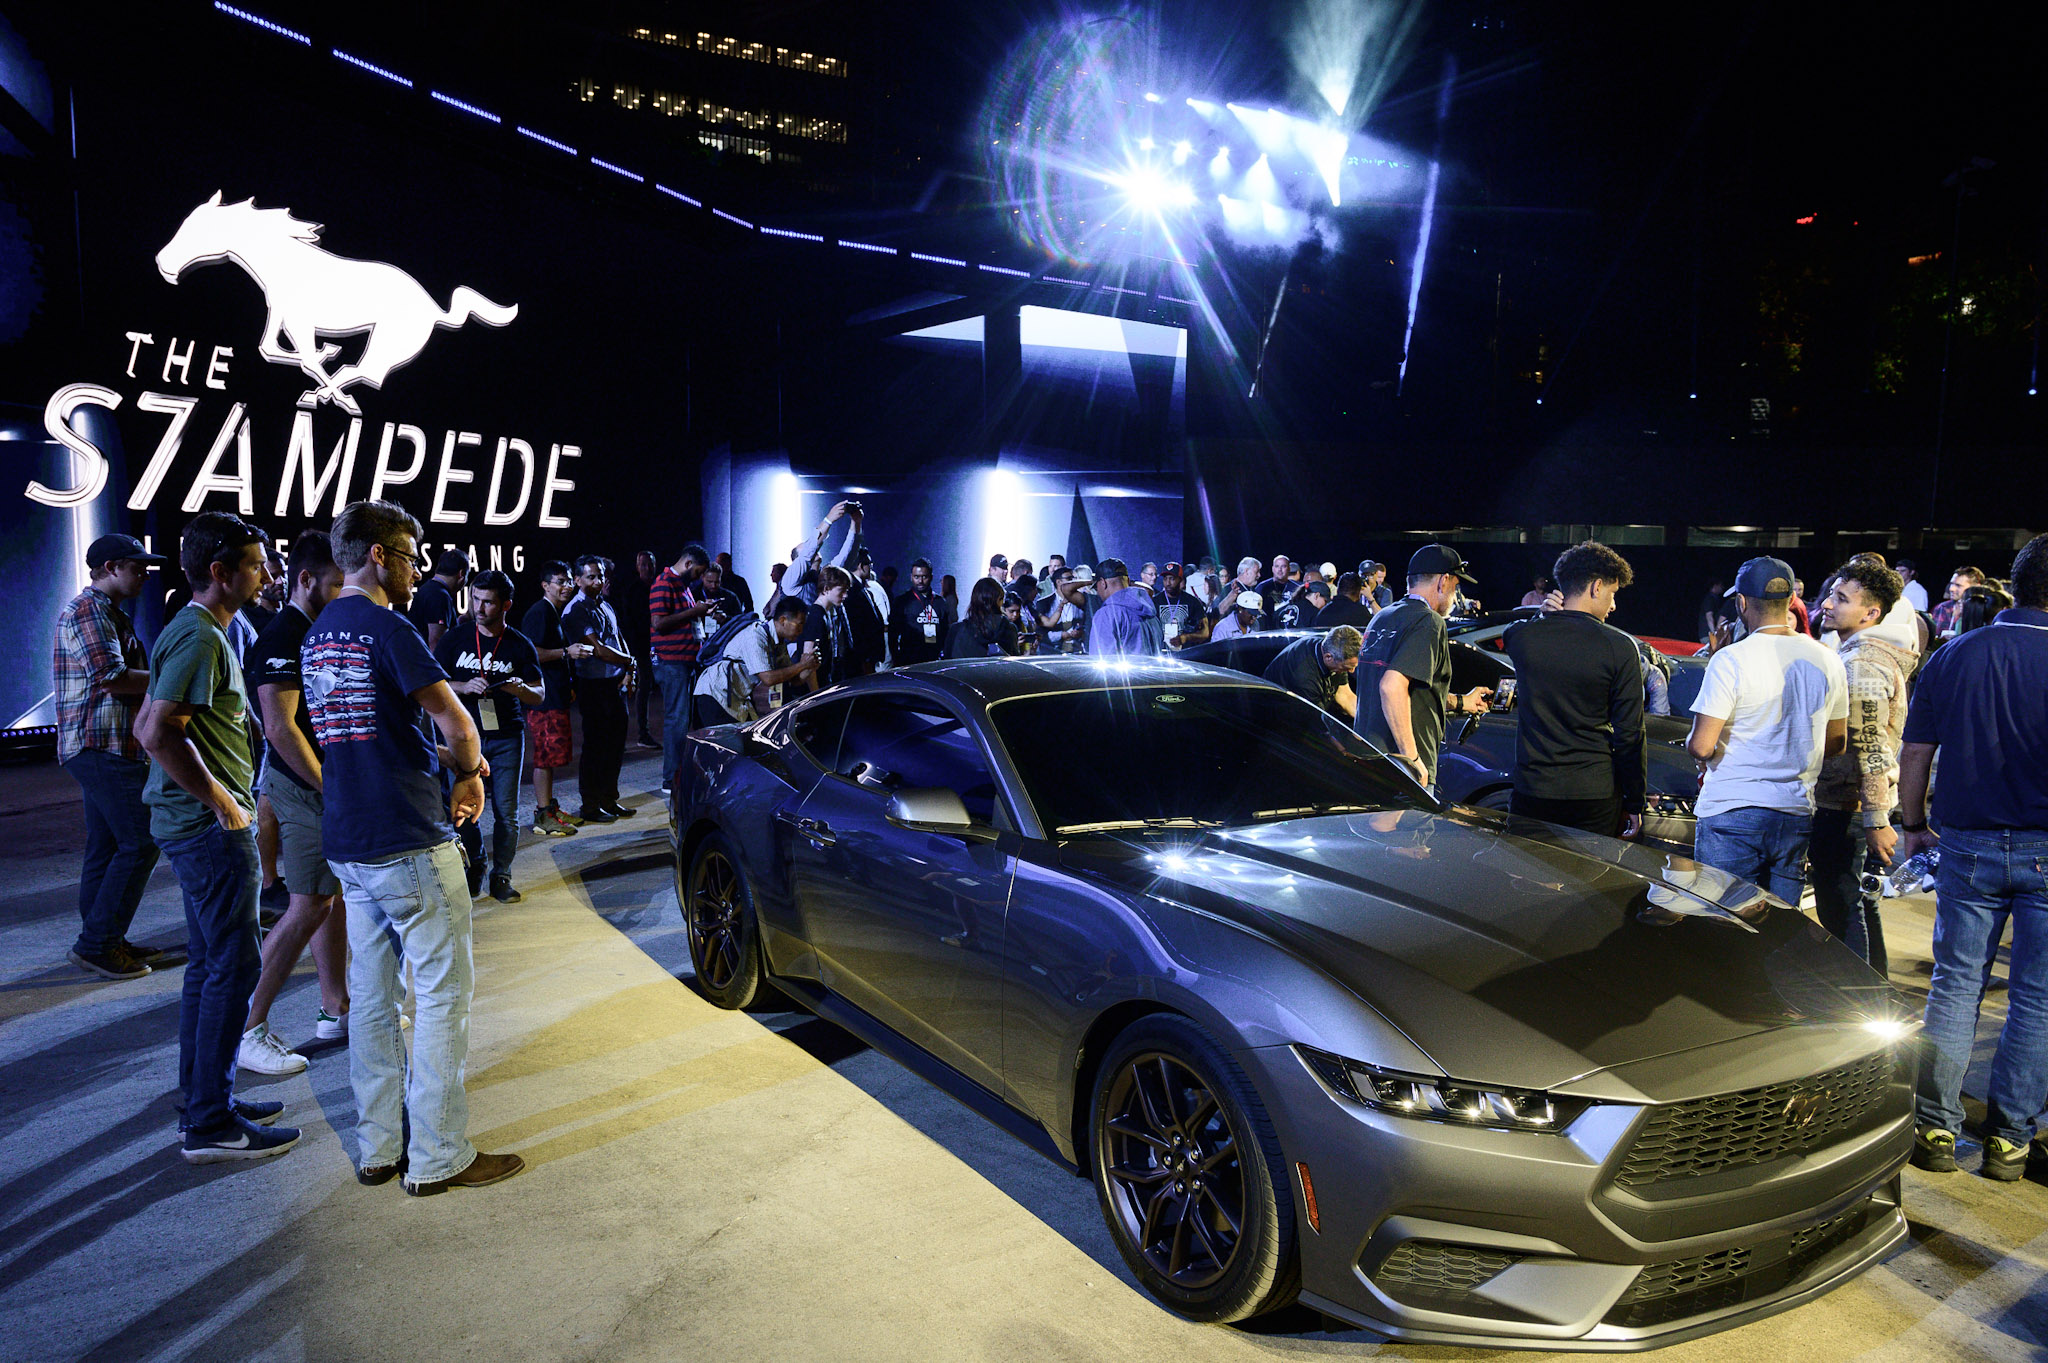 The 2024 Ford Mustang is unveiled at Hart Plaza in Detroit on Wednesday, Sept. 14 2022.